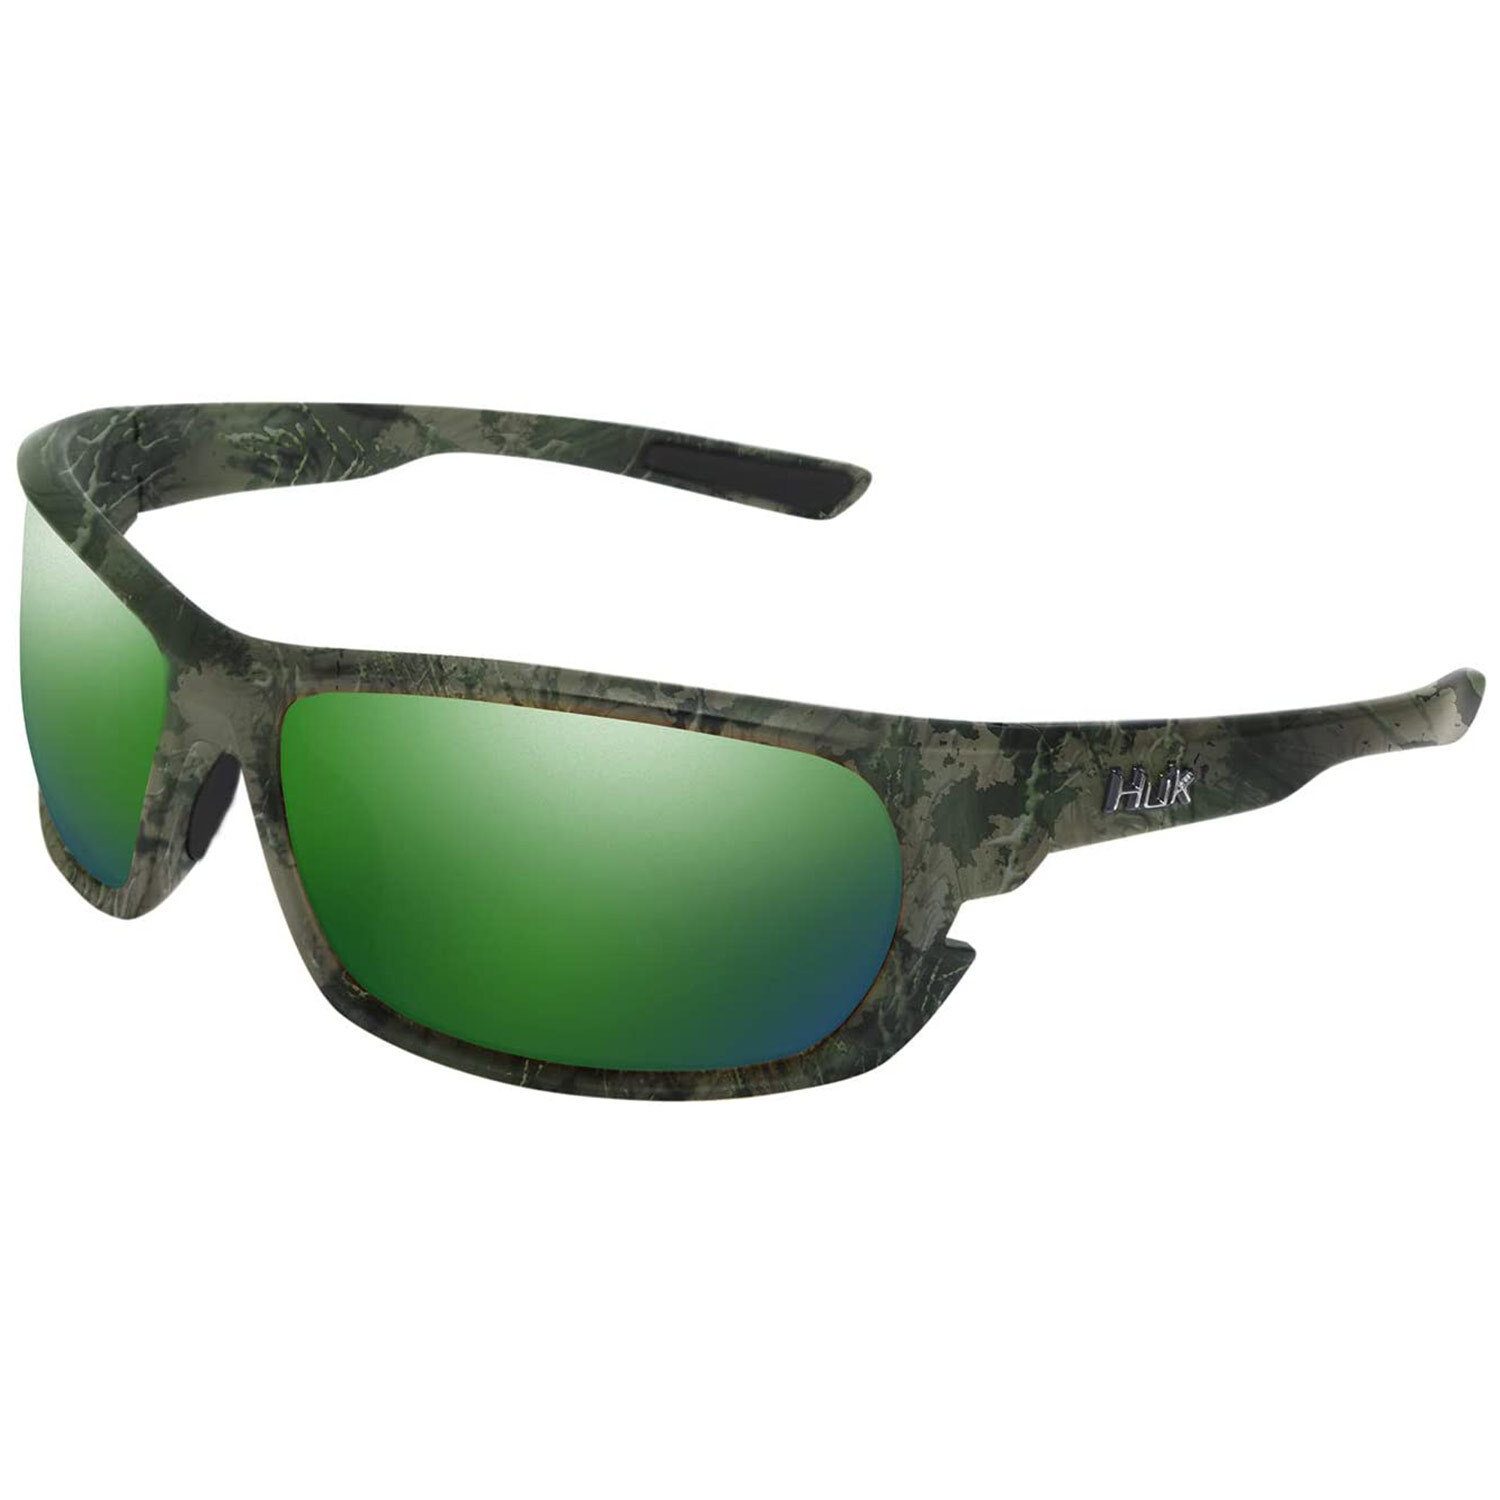 Huk - Youth Current Camo Pursuit Long Sleeve – Shades Sunglasses